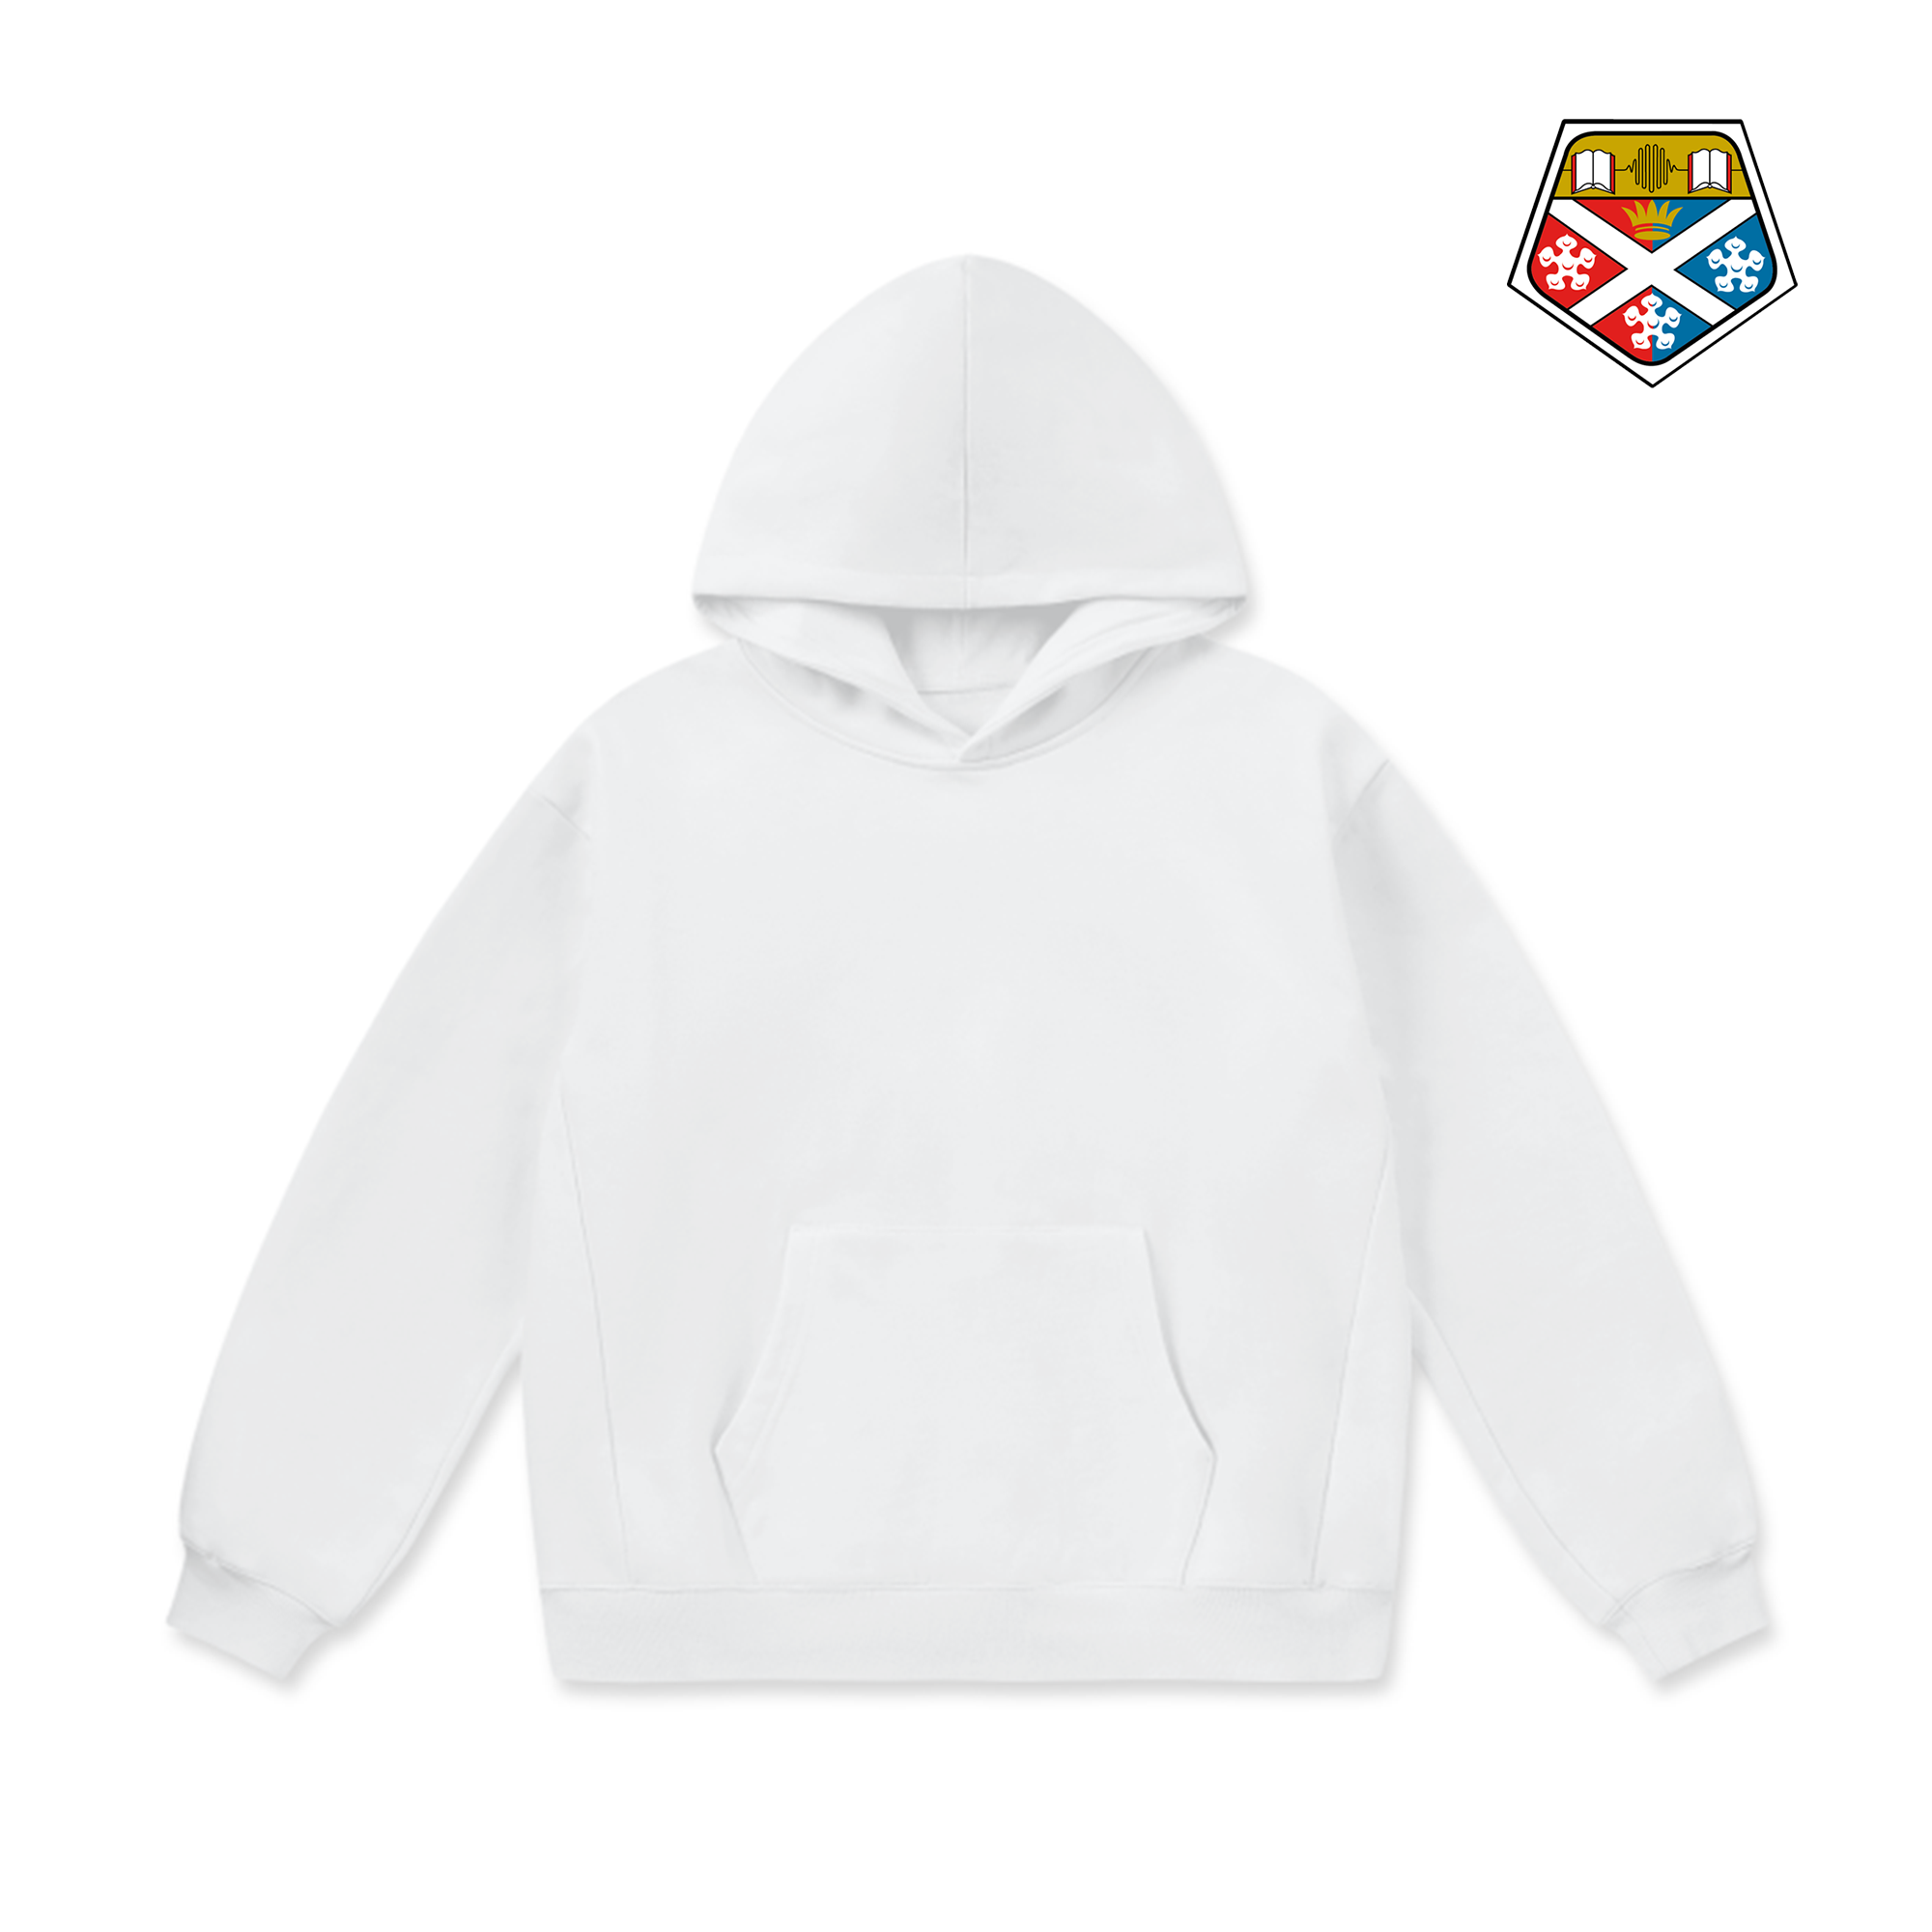 LCC Super Weighted Hoodie - University of Strathclyde Glasgow (Classic)